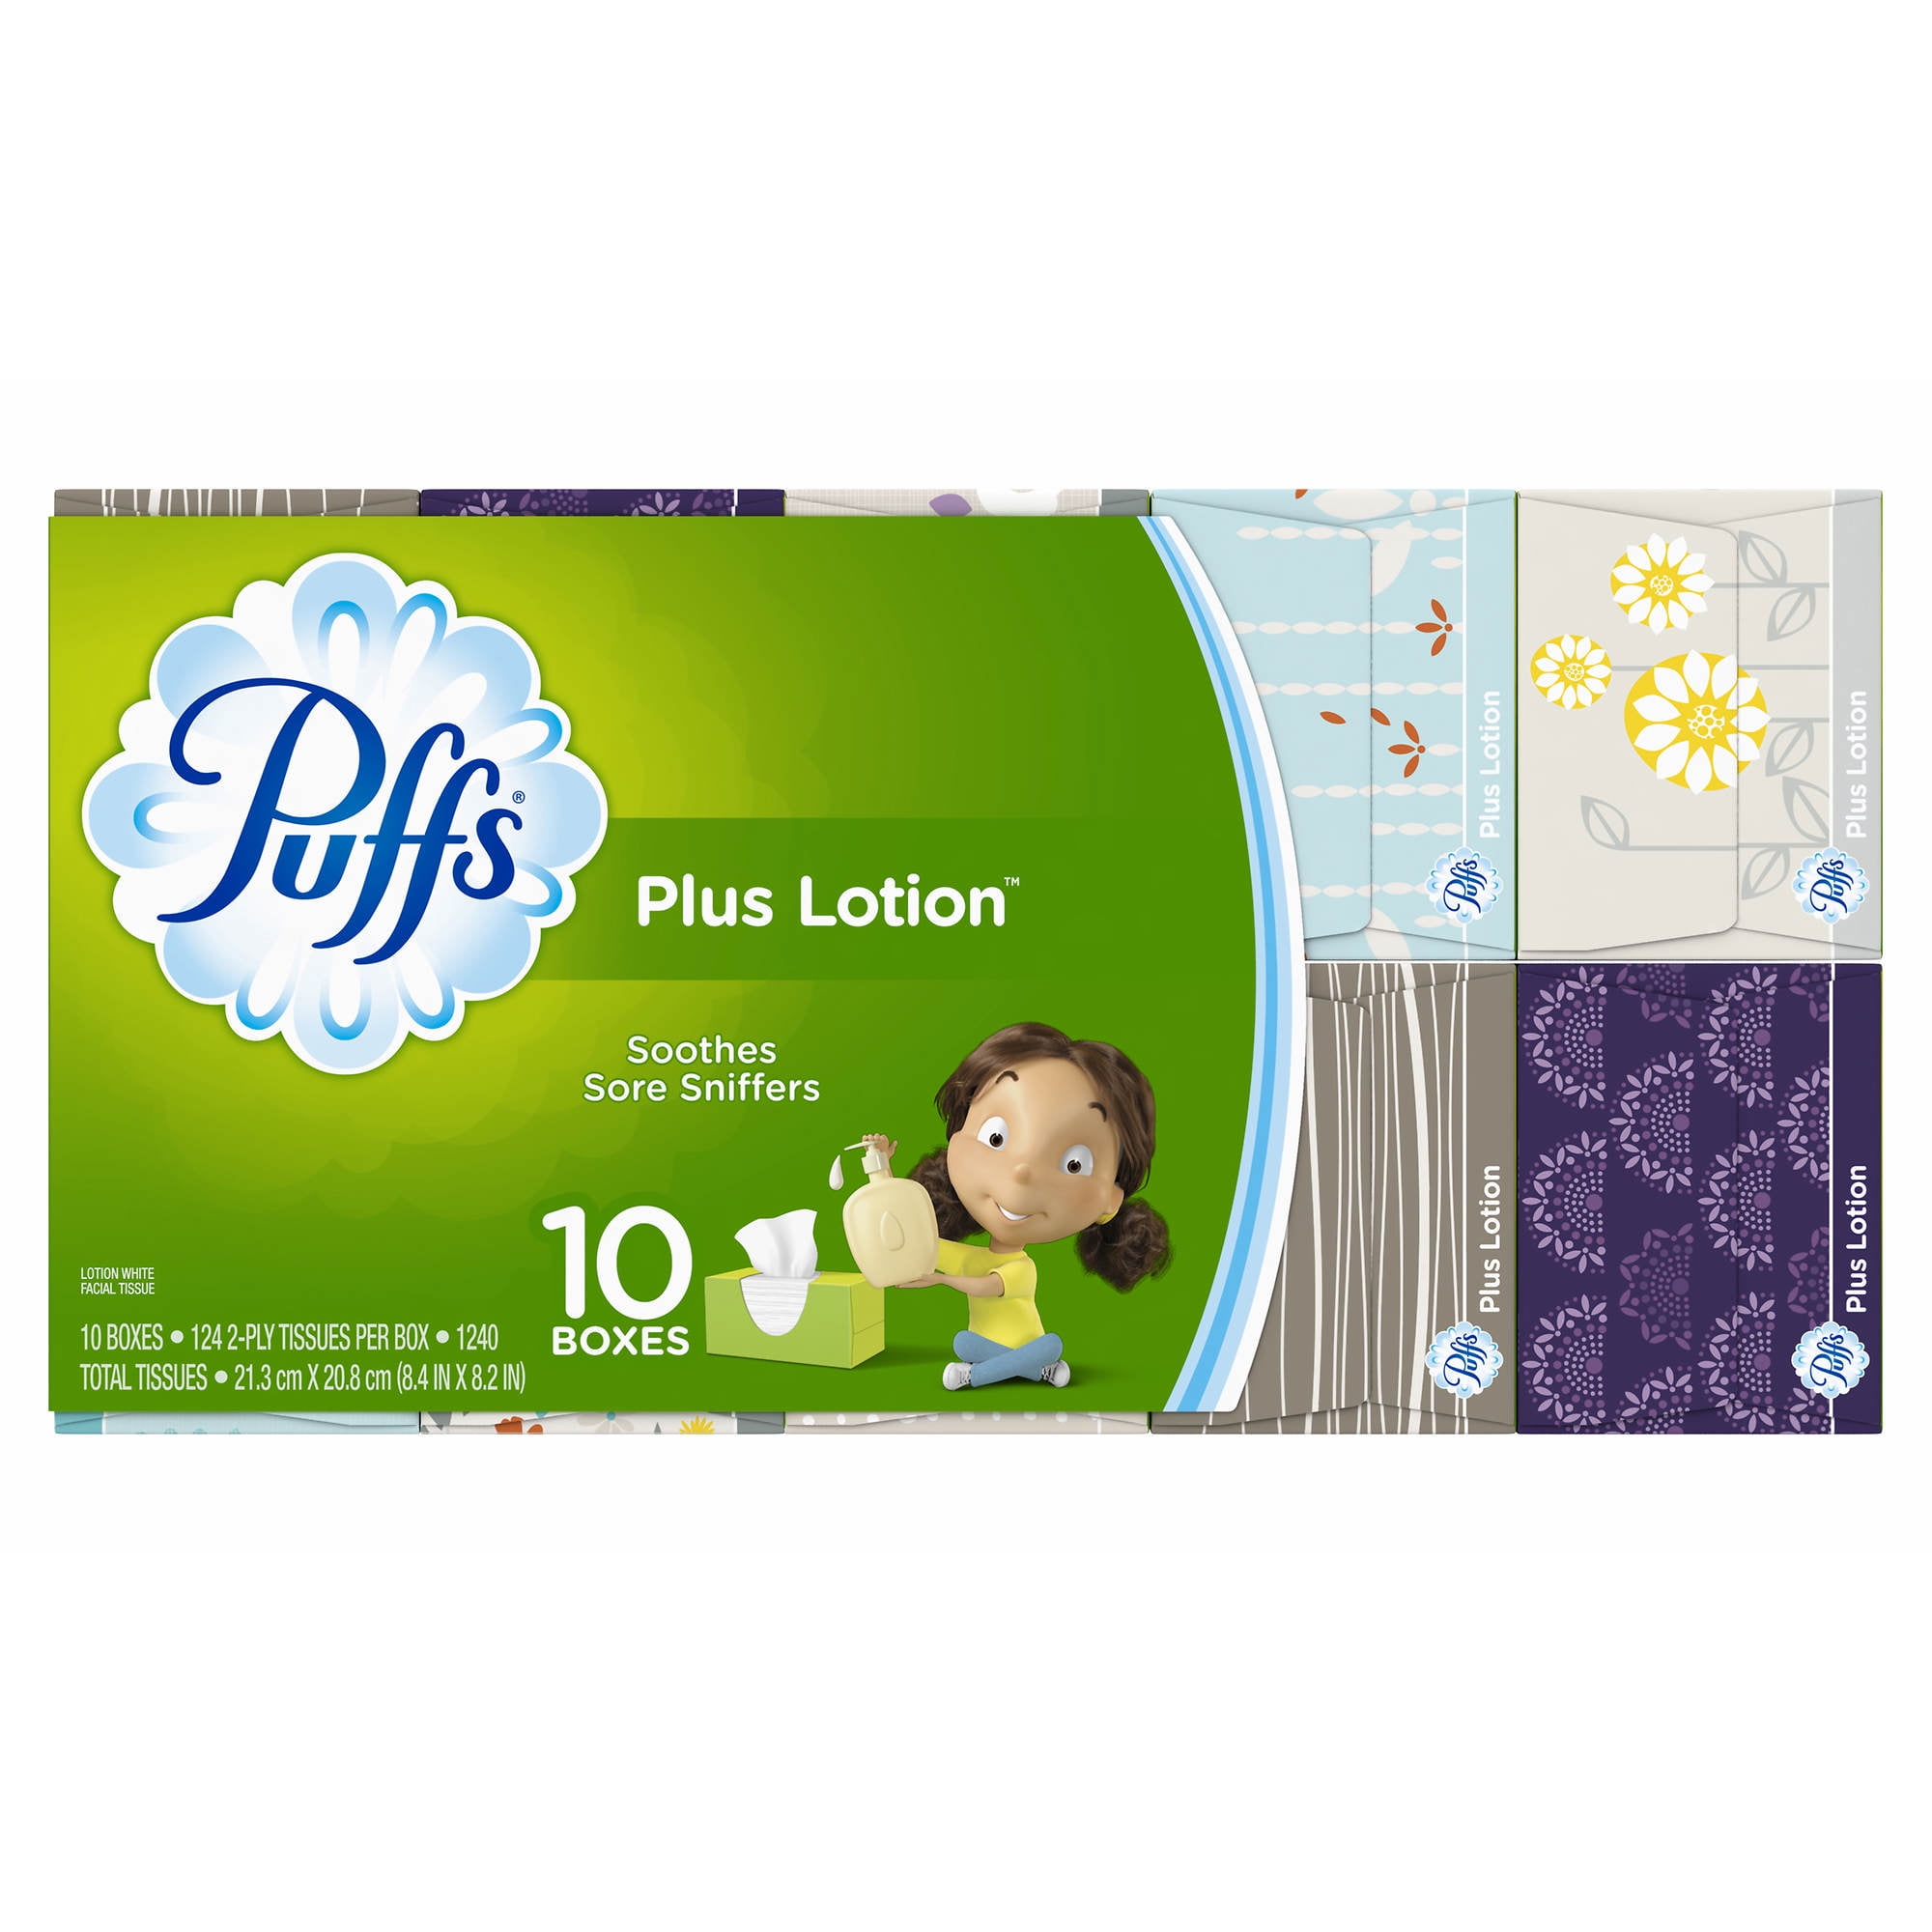 Puffs Plus Lotion To Go 2 Ply Facial Tissue White 10 Tissues Per Pack Box  Of 2 Packs - Office Depot